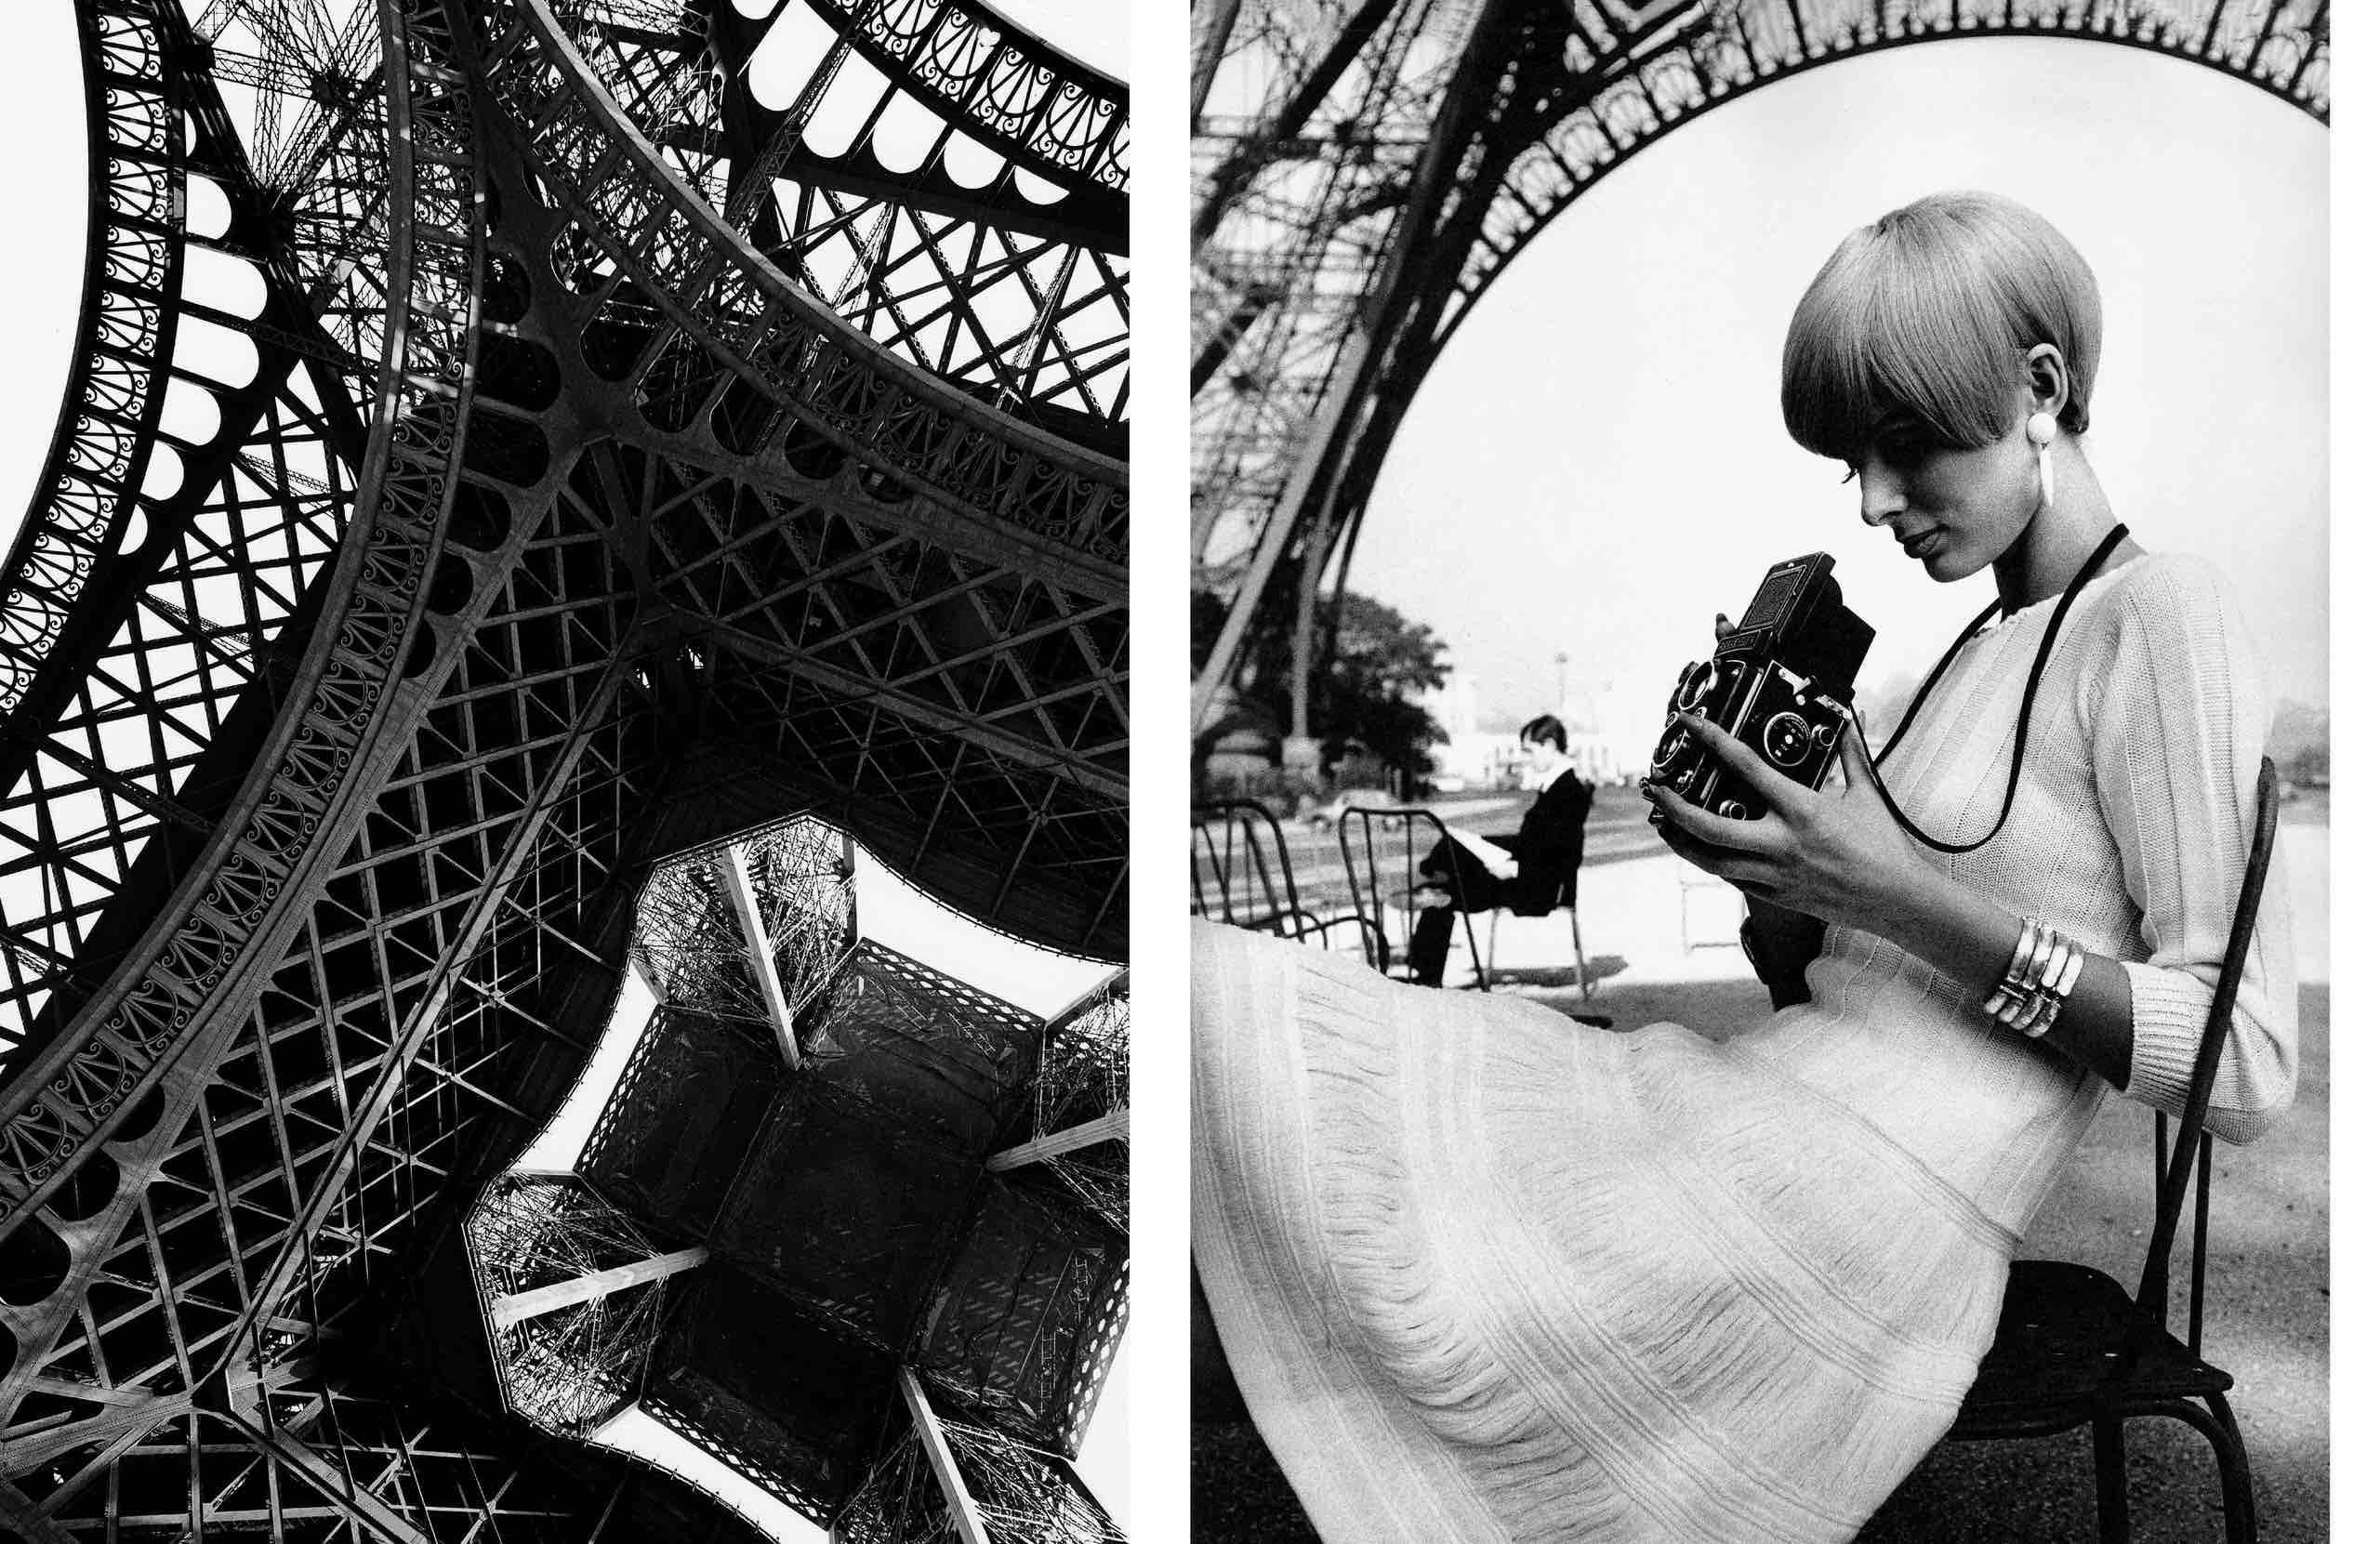 THIS SPRING LOUIS VUITTON IS PUBLISHING TWO NEW TITLES IN ITS FASHION EYE  SERIES OF PHOTOGRAPHY BOOKS - Numéro Netherlands